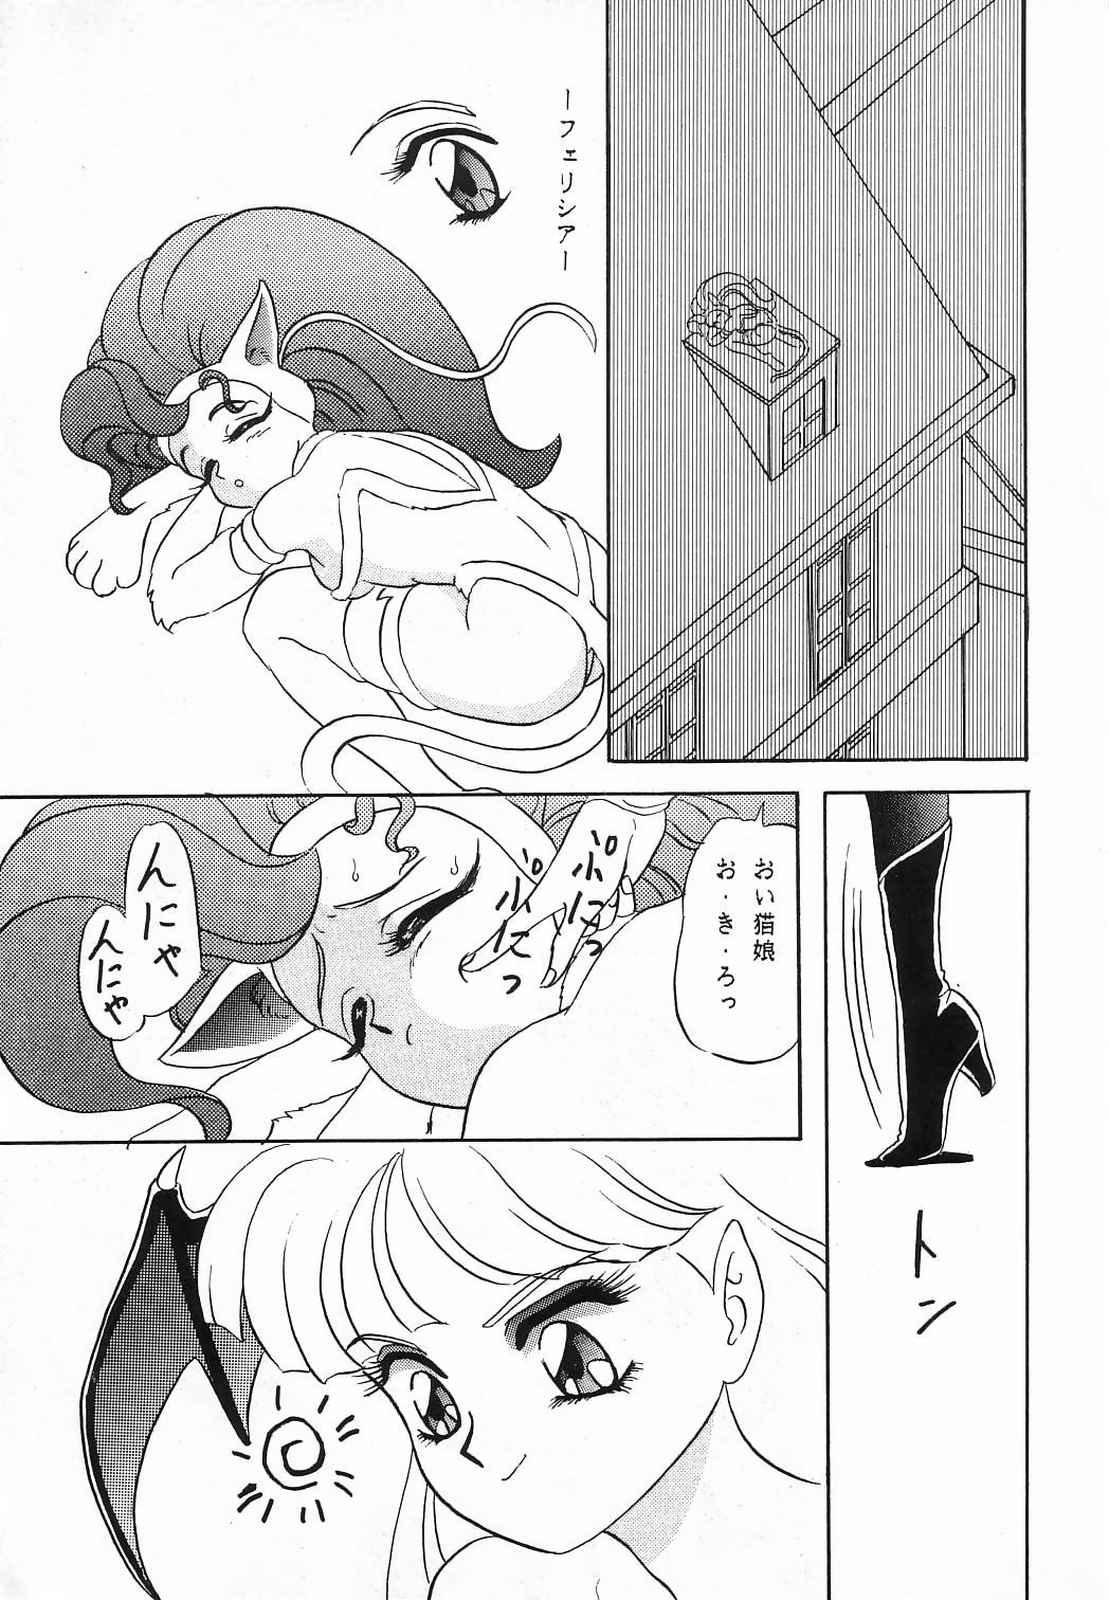 Pussylick Lunch Box 10 - Lunch Time 2 - Sailor moon Darkstalkers Tranny - Page 7